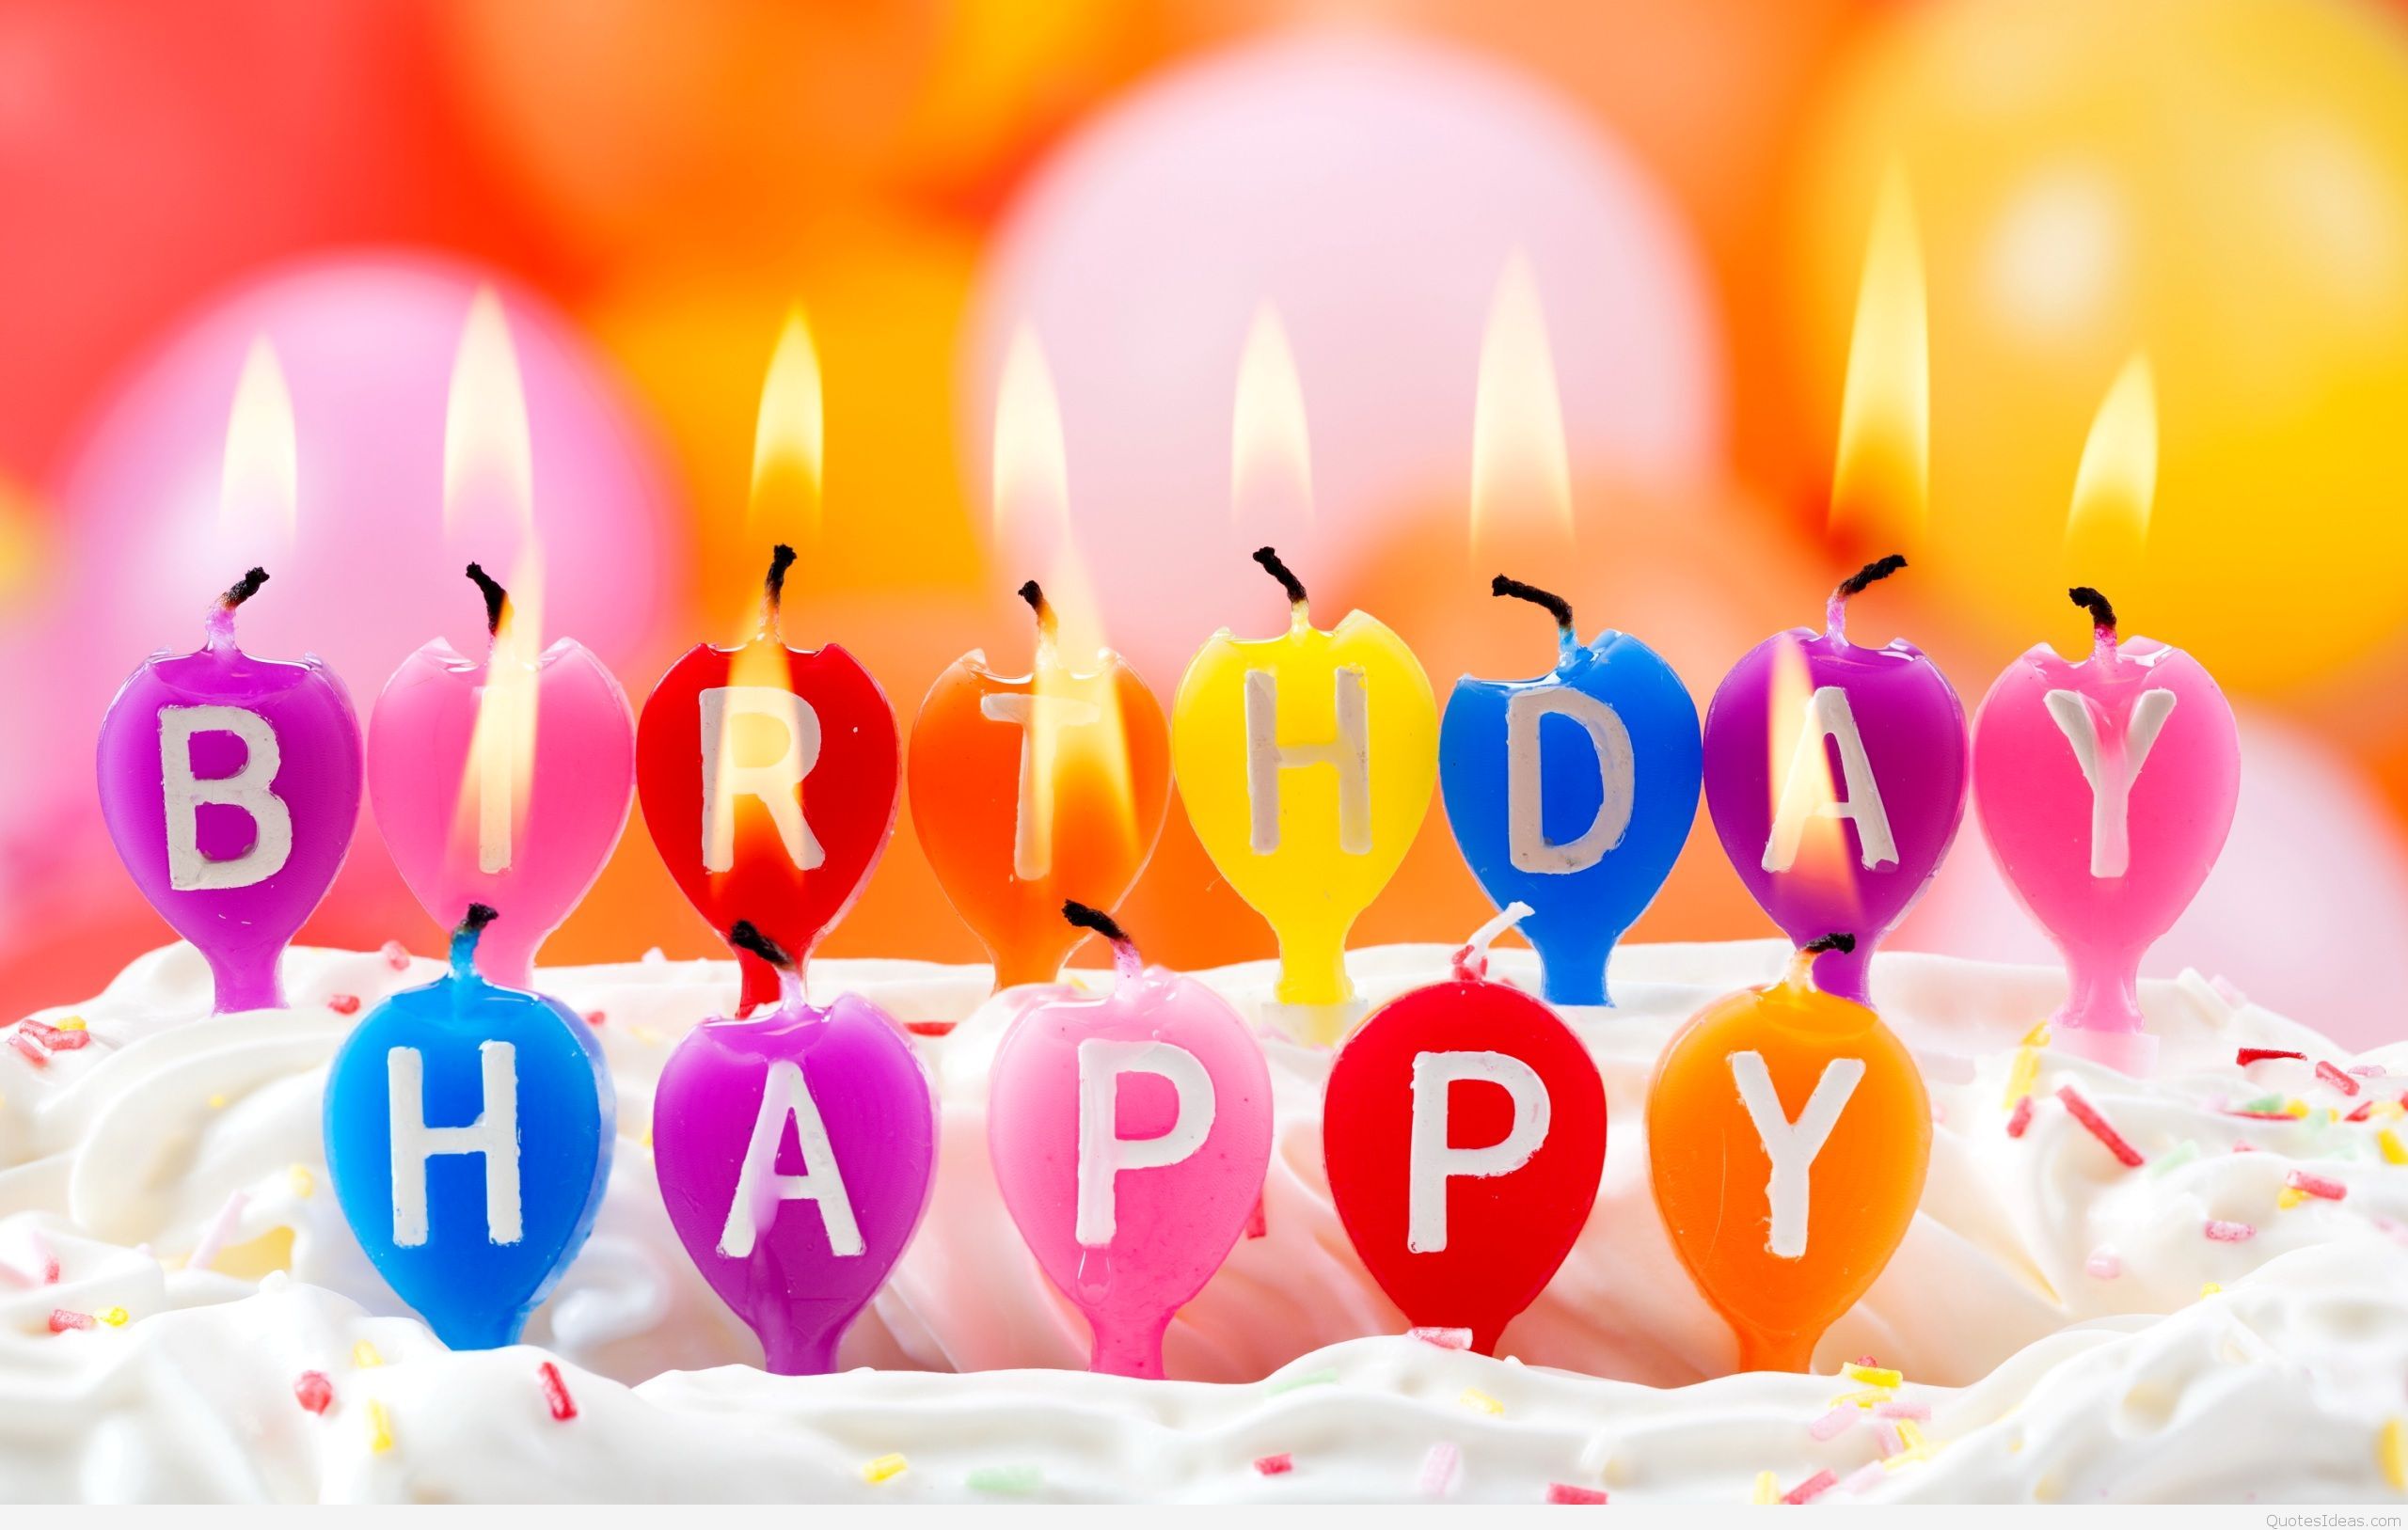 Best cute happy birthday messages, cards wallpaper